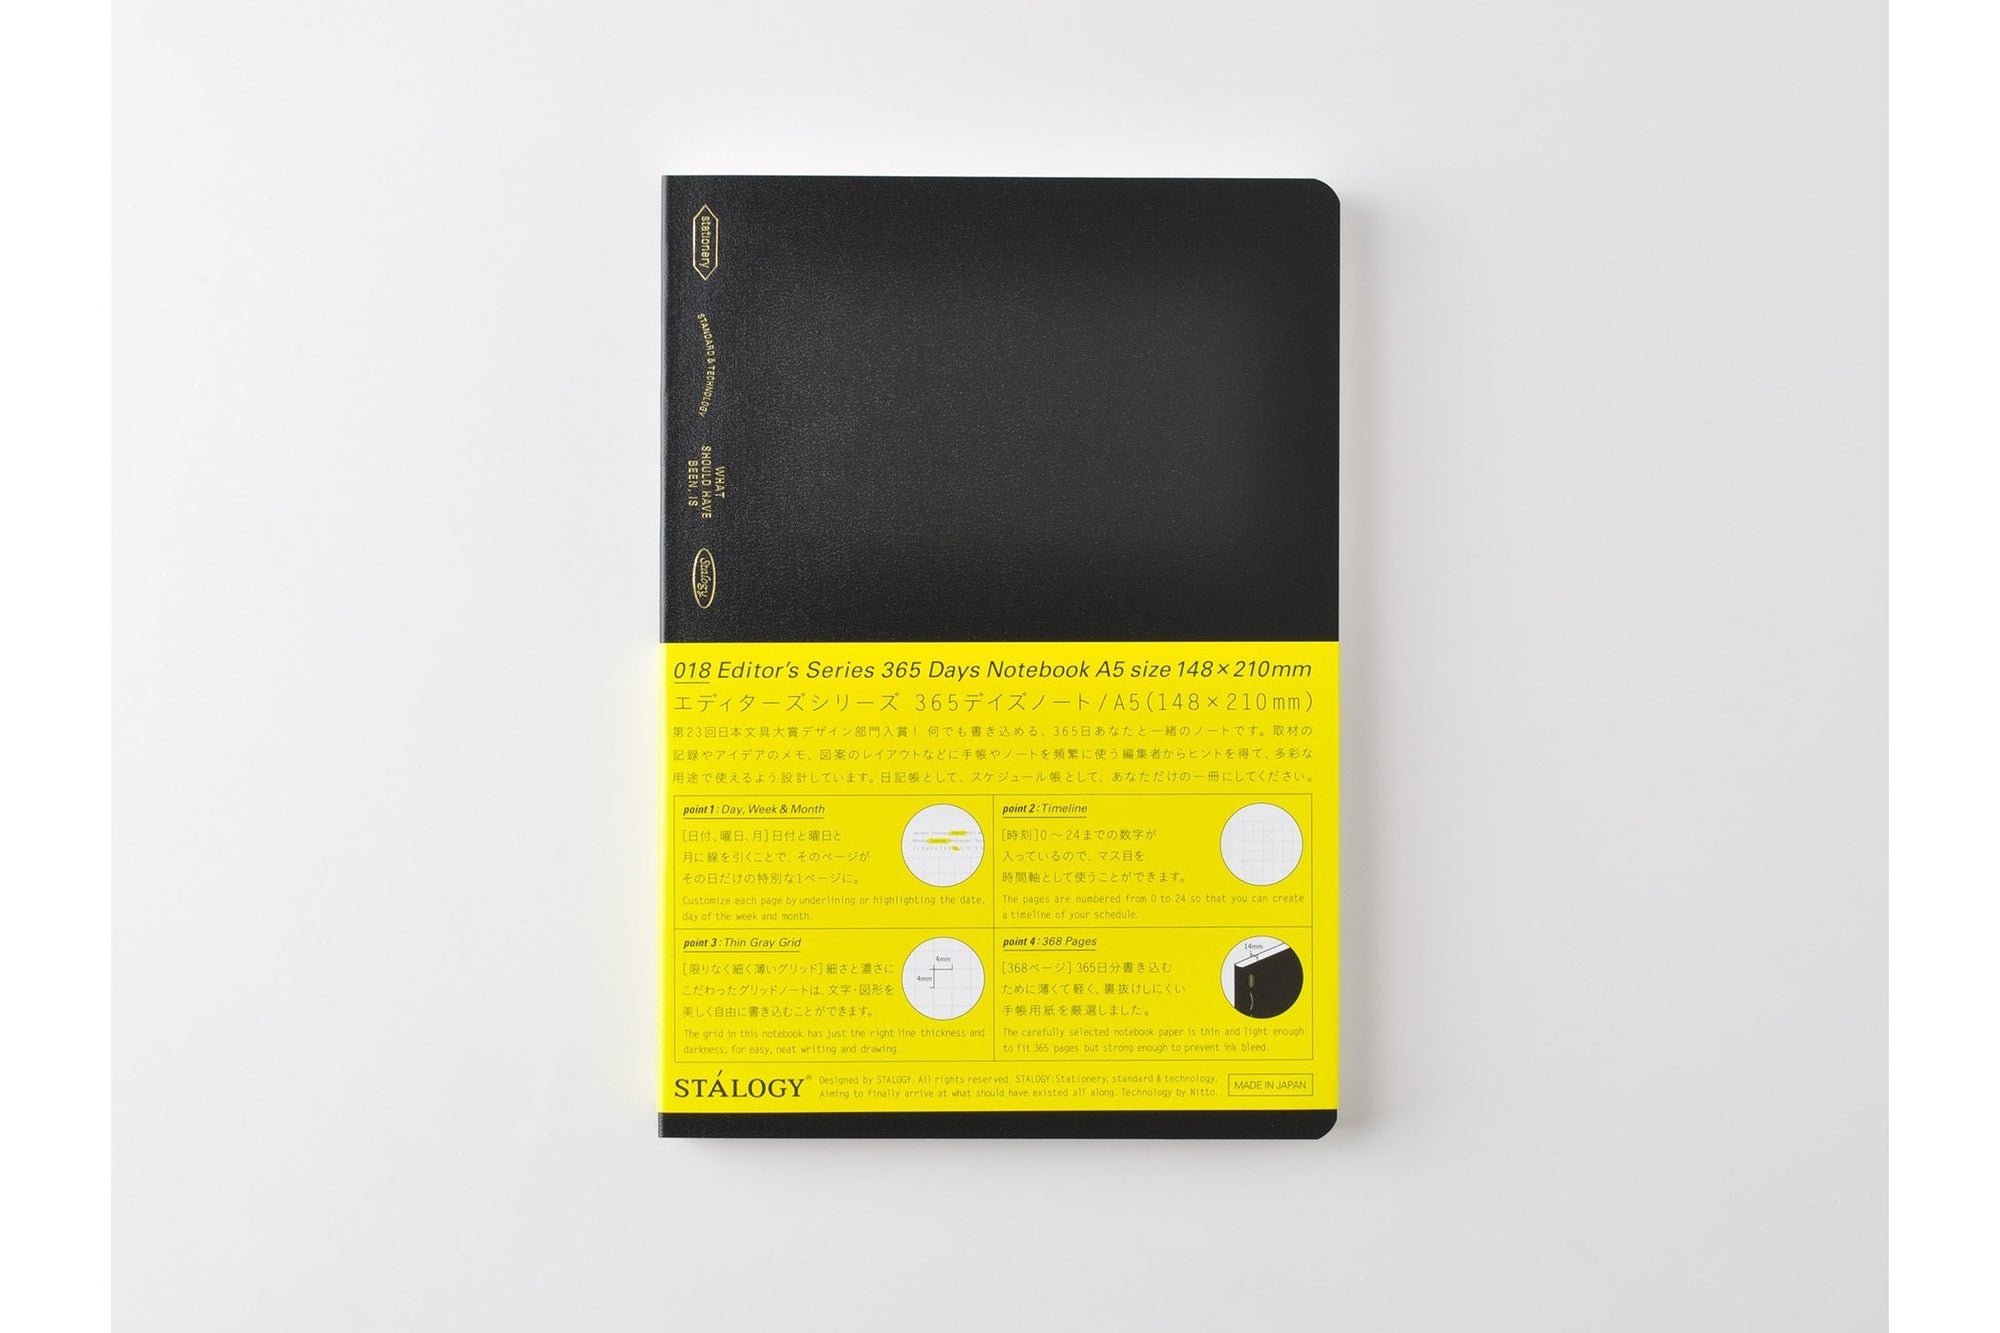 Stalogy Editor's Series 365Days Notebook - A5 - Grid - 368 Pages - Black